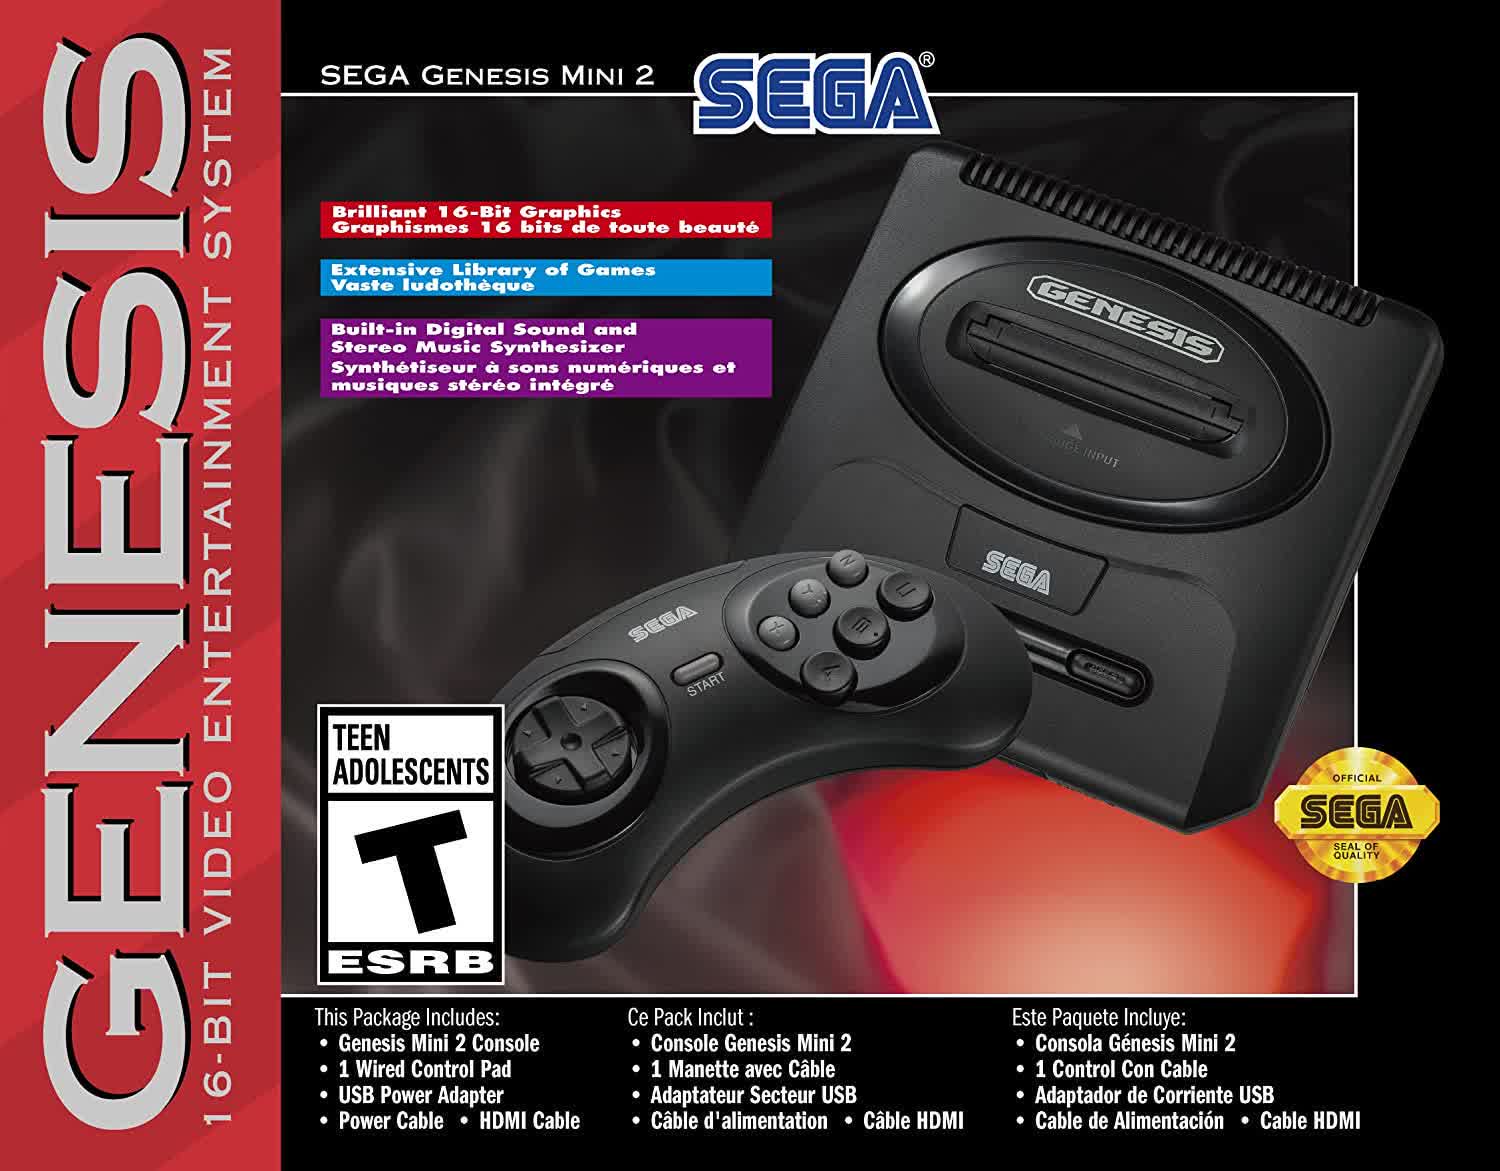 Sega's Genesis Mini 2 will ship with a well-rounded bundle of 60 games